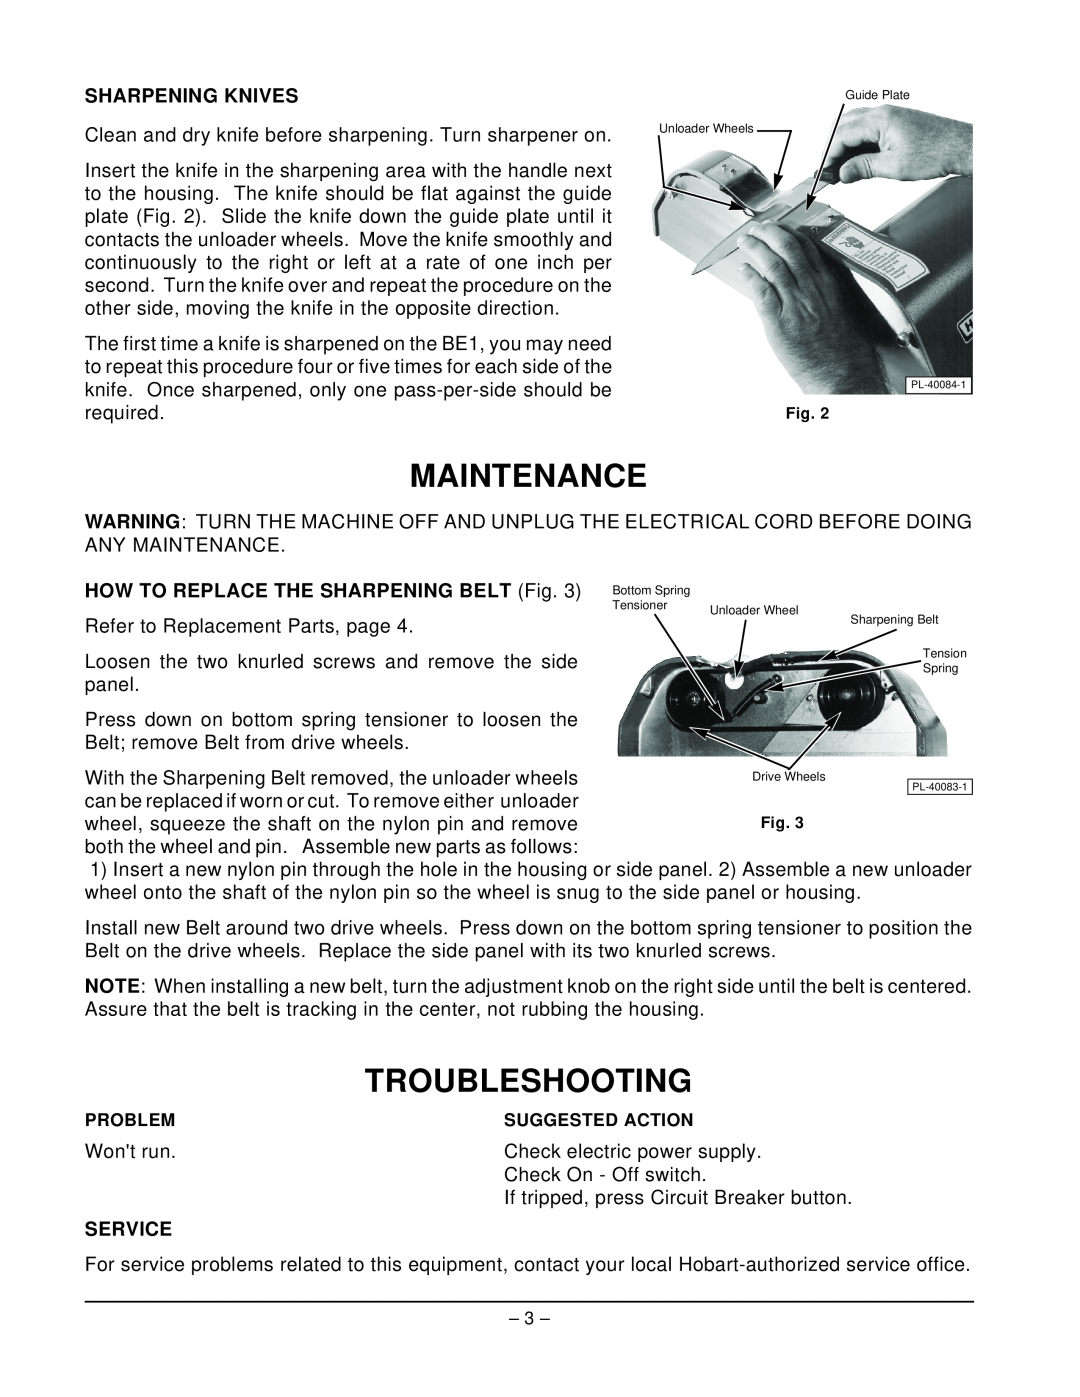 Hobart ML - 104443 manual Maintenance, Troubleshooting, Sharpening Knives, HOW TO REPLACE THE SHARPENING BELT Fig, Service 